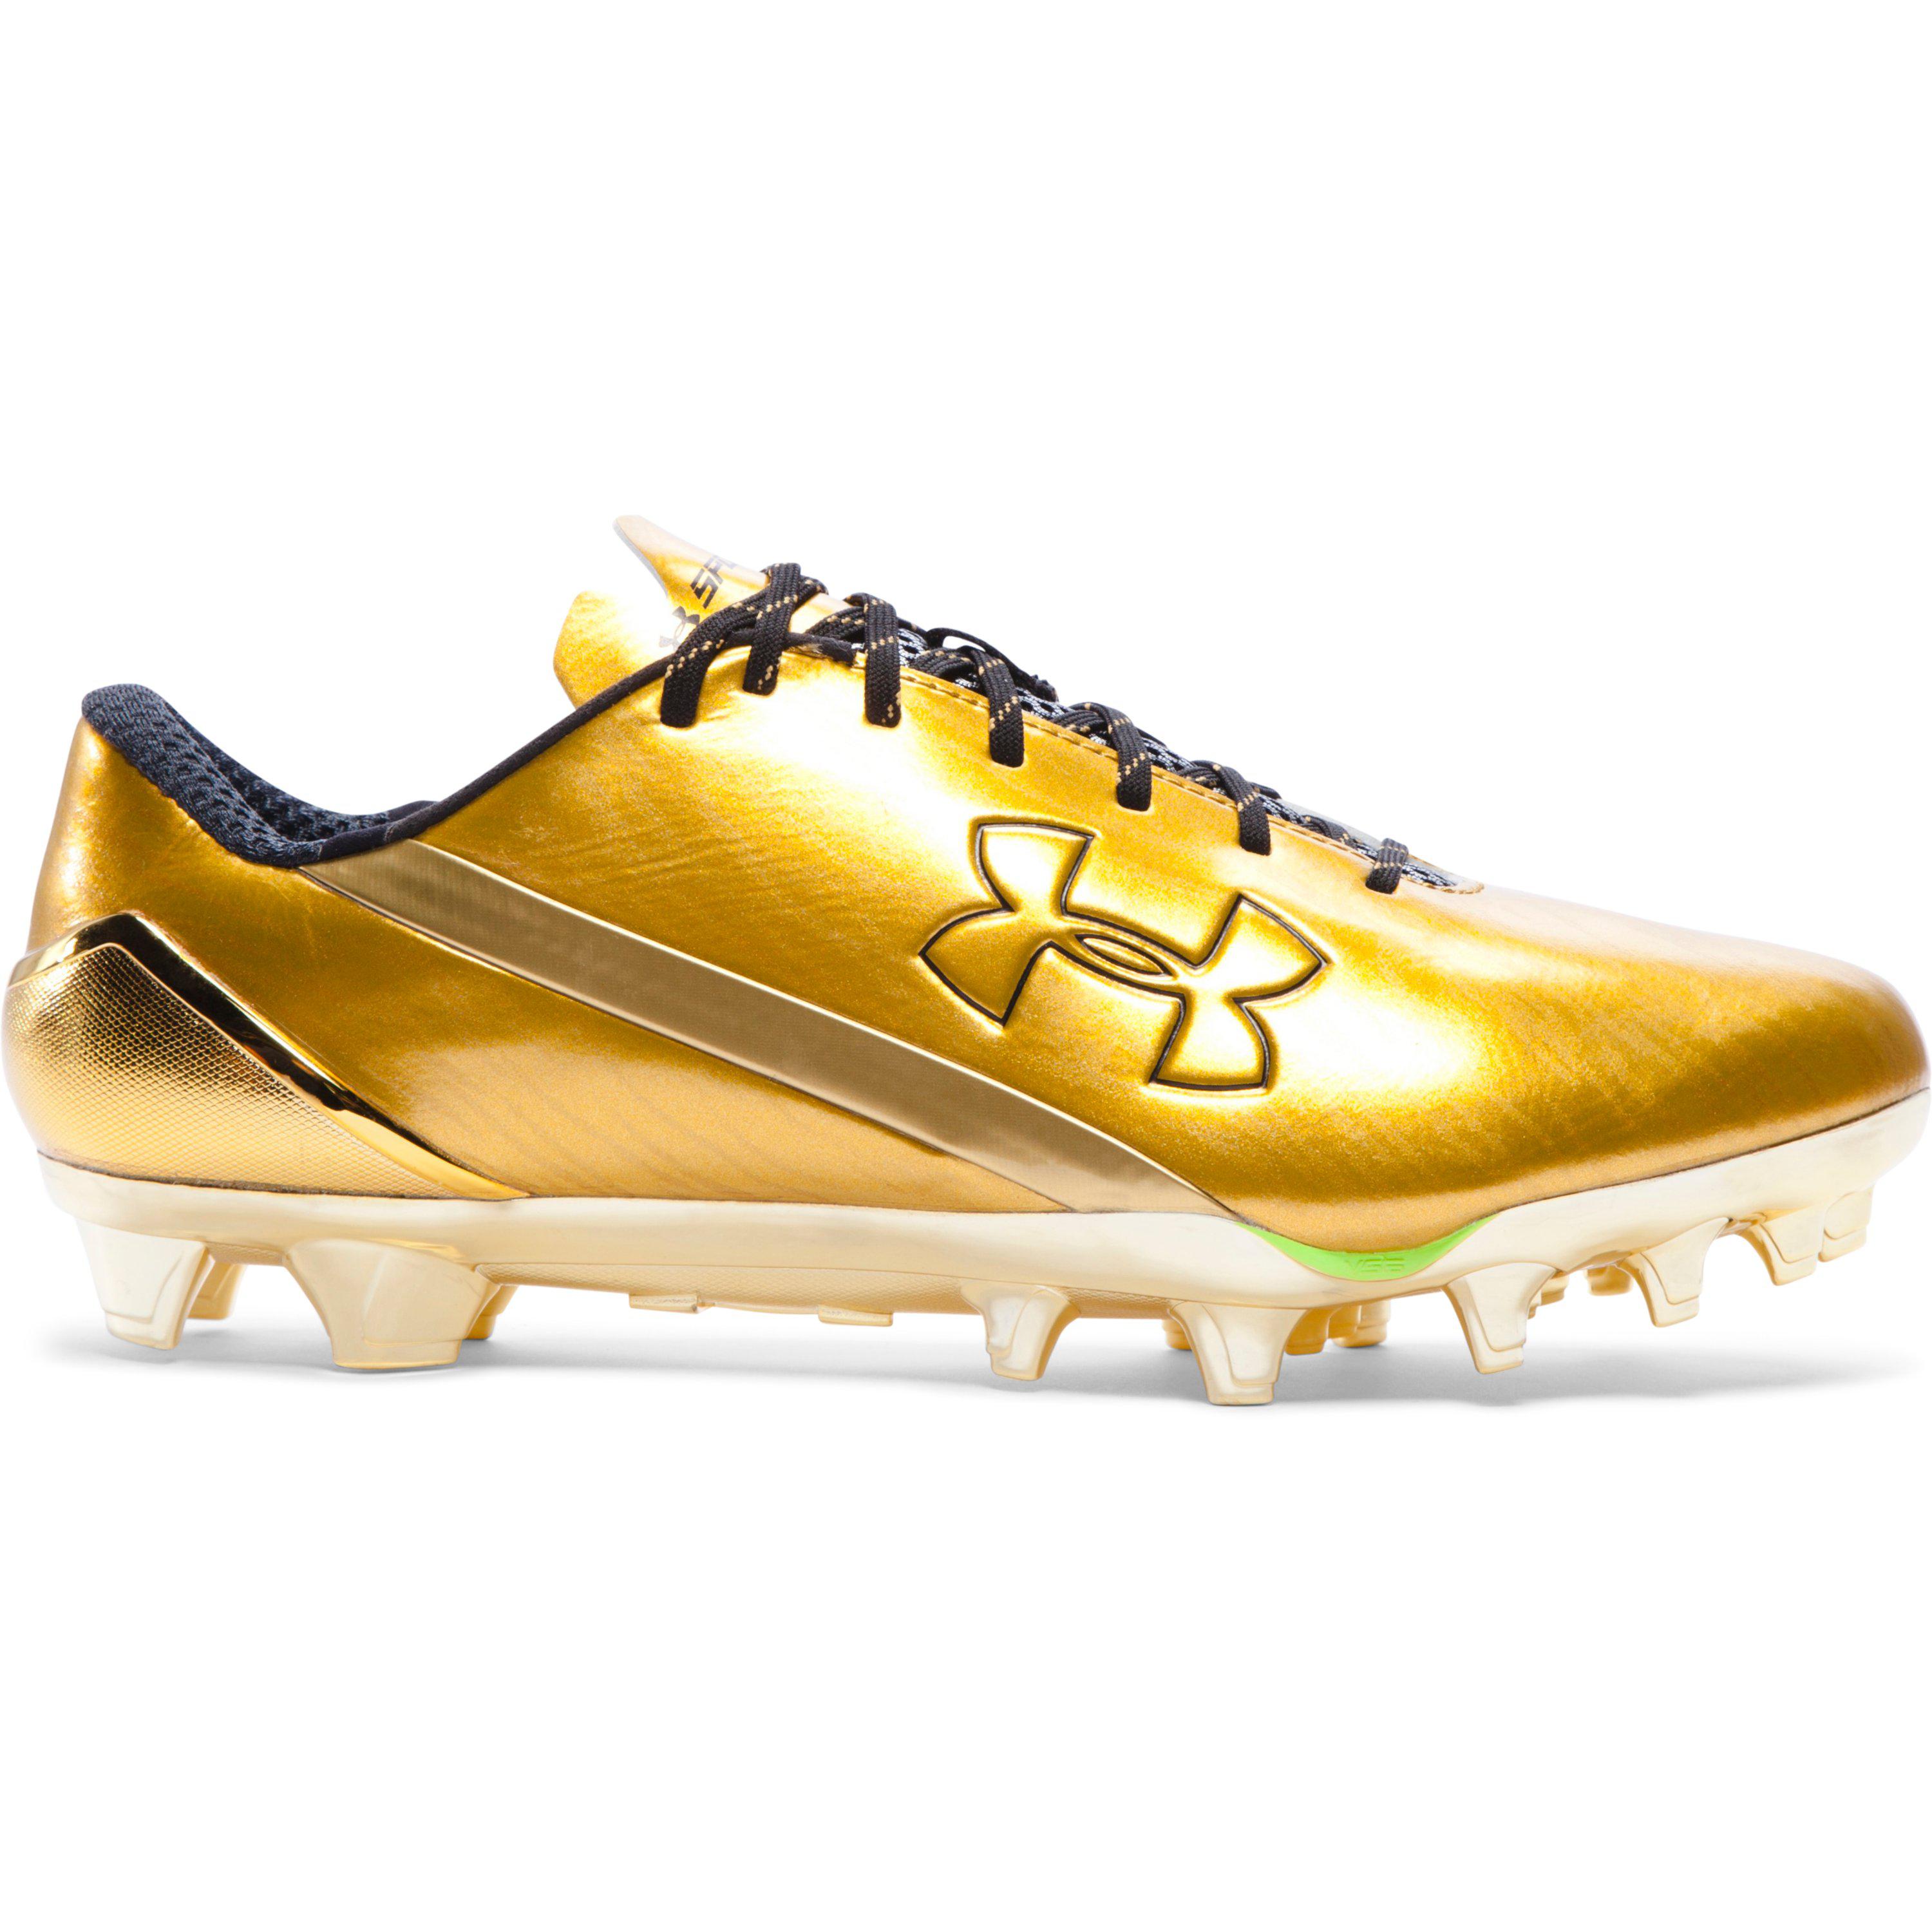 Under Armour Synthetic Men's Ua Spotlight Football Cleats – Limited ...